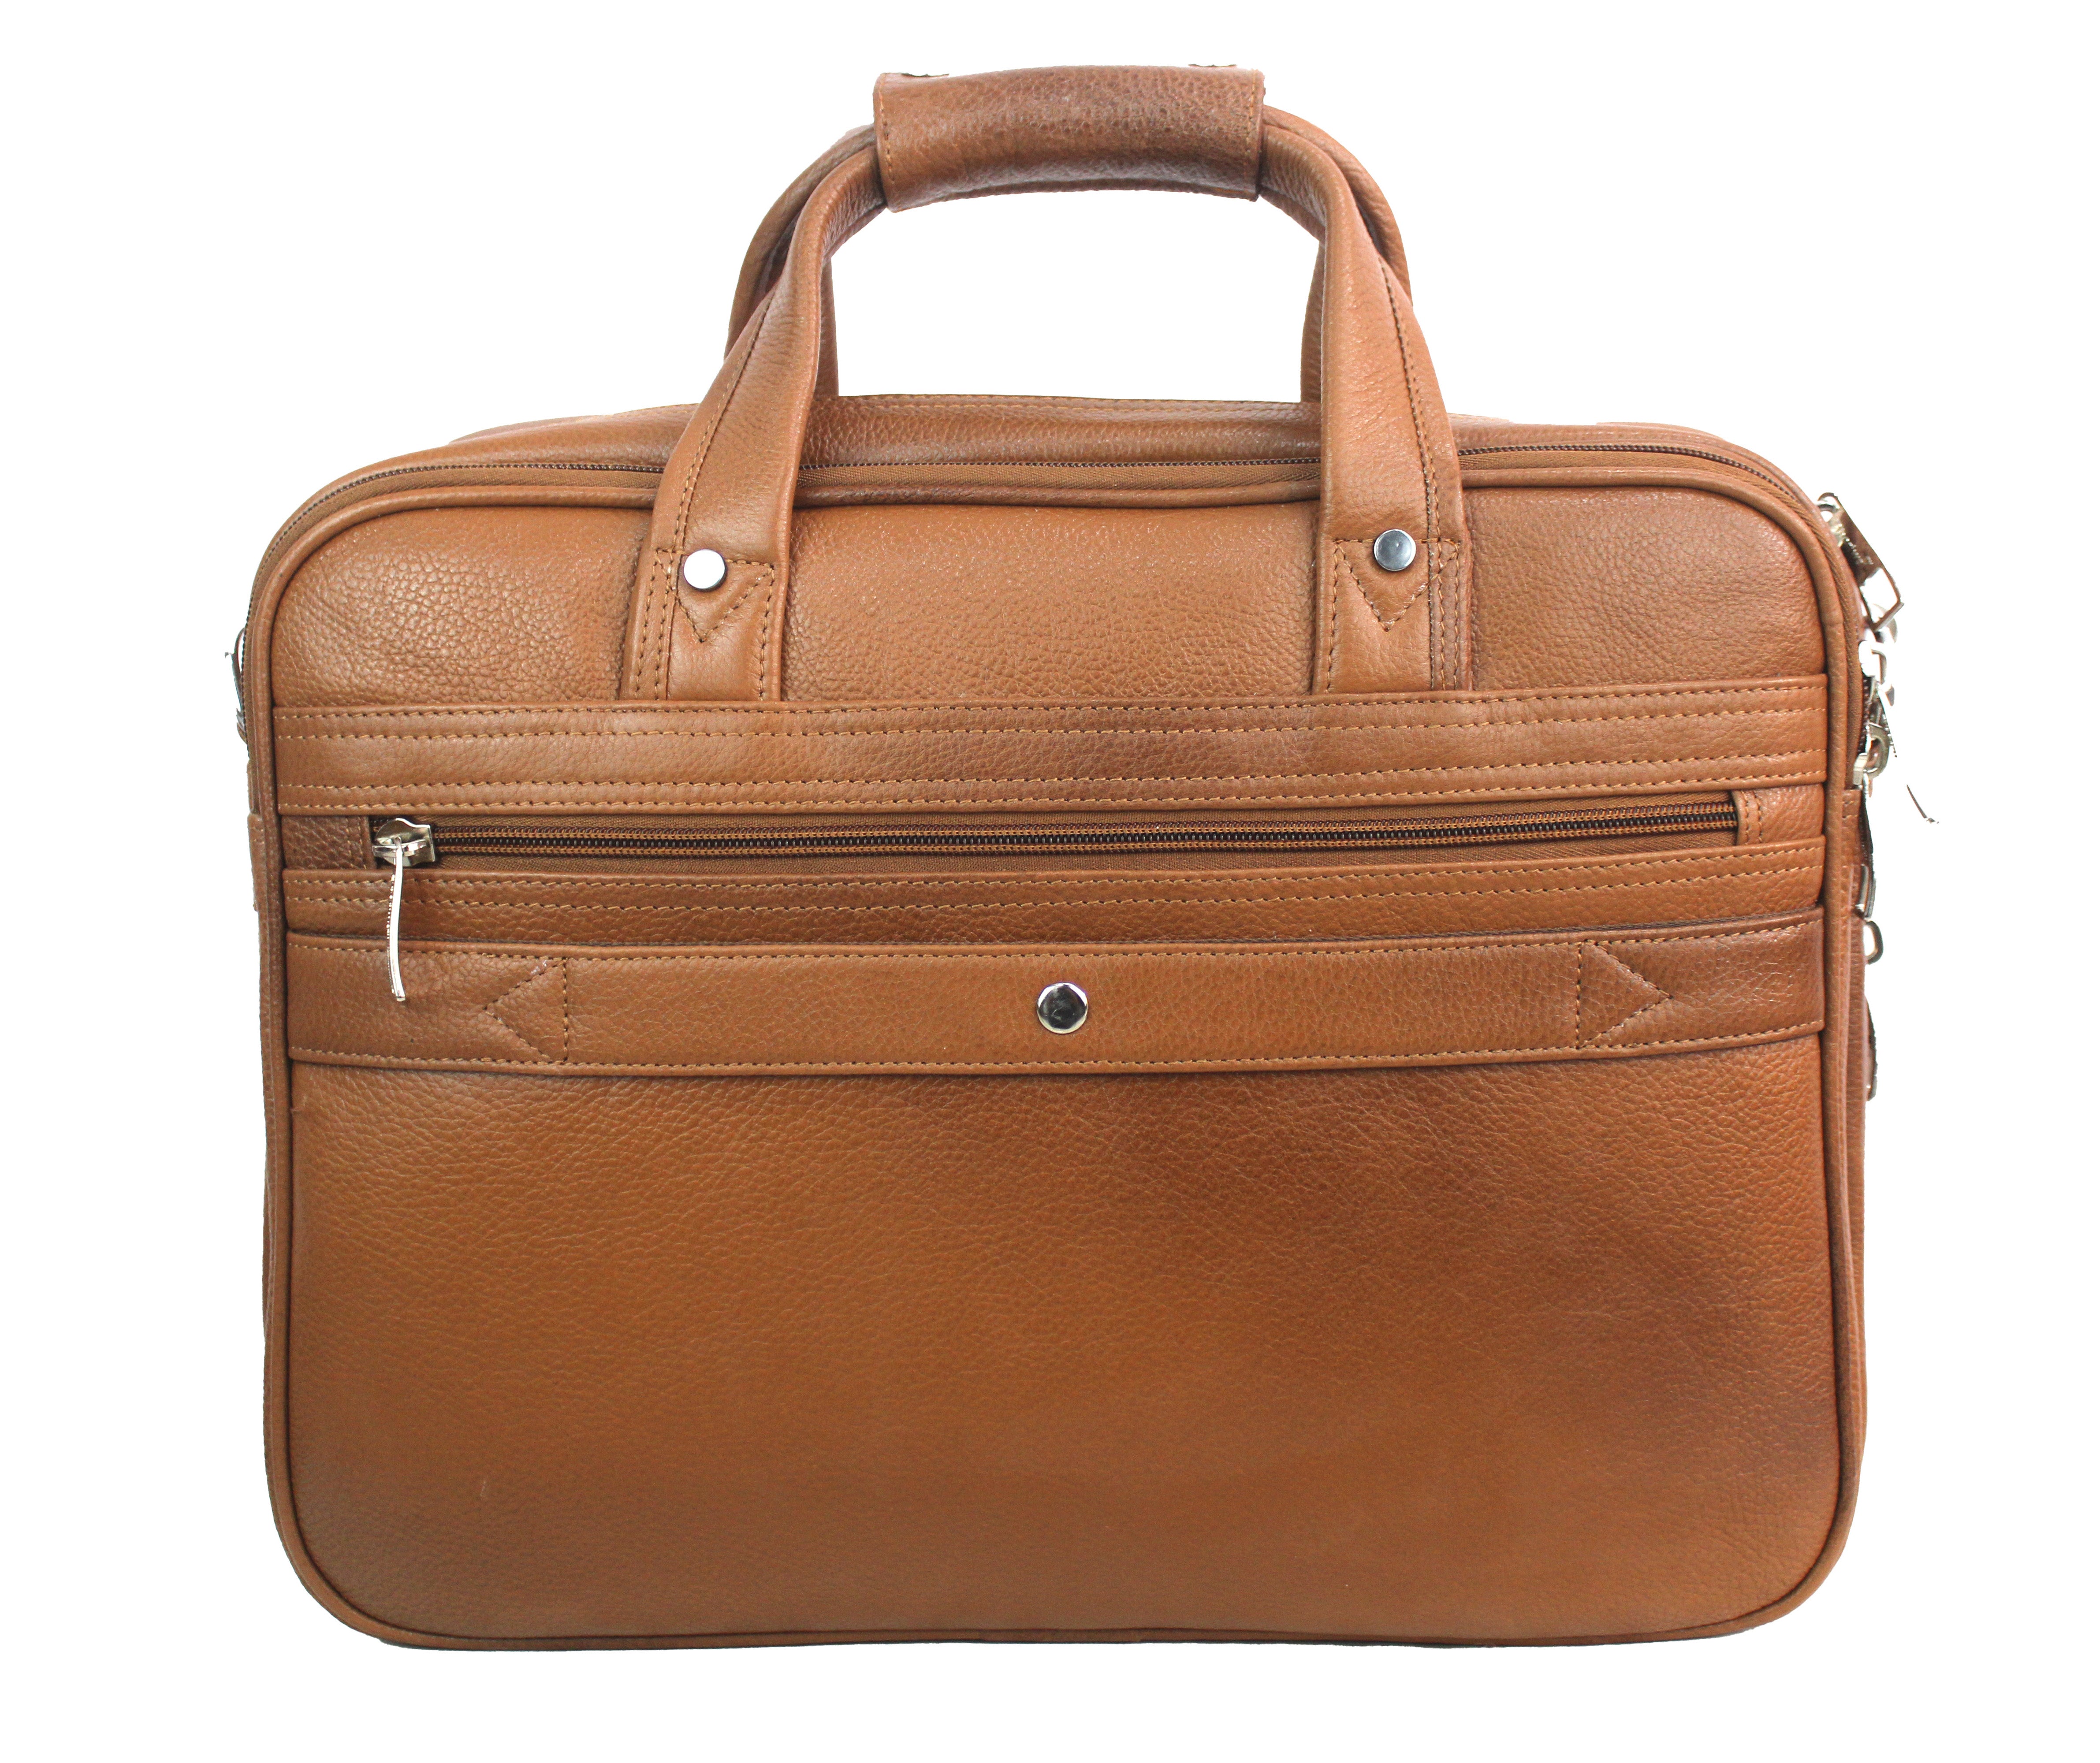 Office Leather Bags | Laptop bag for women, Leather office bags, Bags